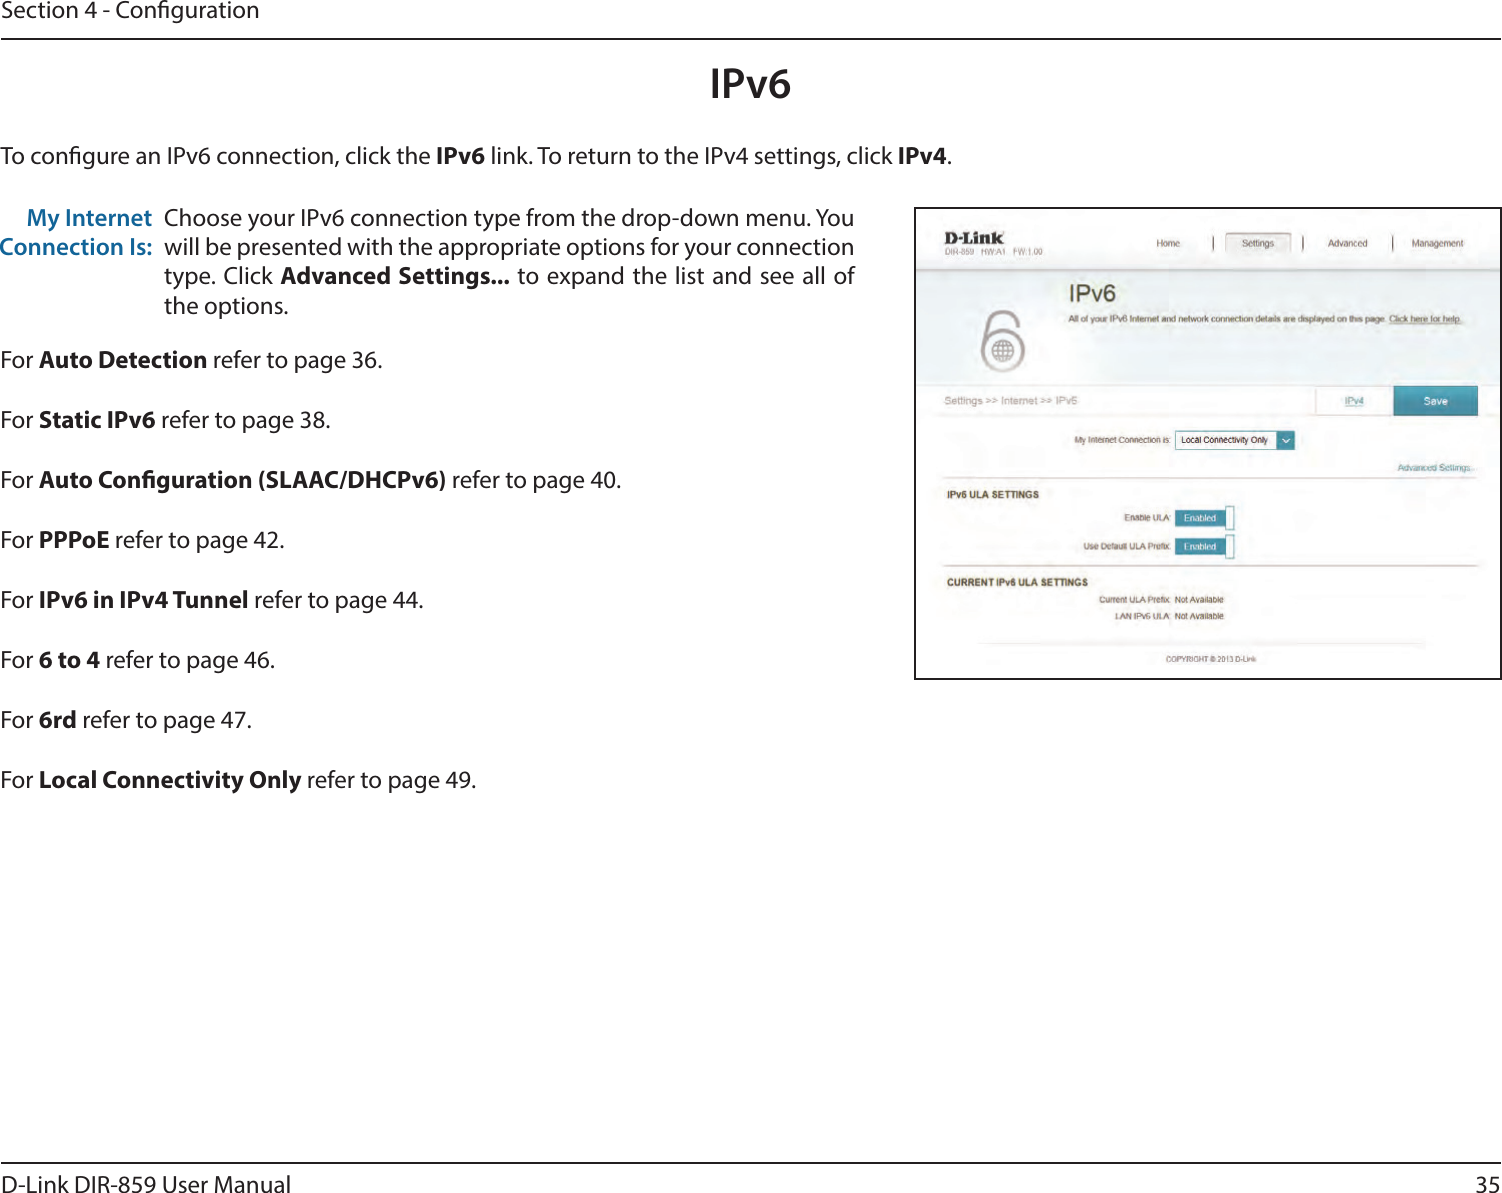 35D-Link DIR-859 User ManualSection 4 - CongurationIPv6To congure an IPv6 connection, click the IPv6 link. To return to the IPv4 settings, click IPv4.Choose your IPv6 connection type from the drop-down menu. You will be presented with the appropriate options for your connection type. Click Advanced Settings... to expand the list and see all of the options.My Internet Connection Is:For Auto Detection refer to page 36.For Static IPv6 refer to page 38.For Auto Conguration (SLAAC/DHCPv6) refer to page 40.For PPPoE refer to page 42.For IPv6 in IPv4 Tunnel refer to page 44.For 6 to 4 refer to page 46.For 6rd refer to page 47.For Local Connectivity Only refer to page 49.